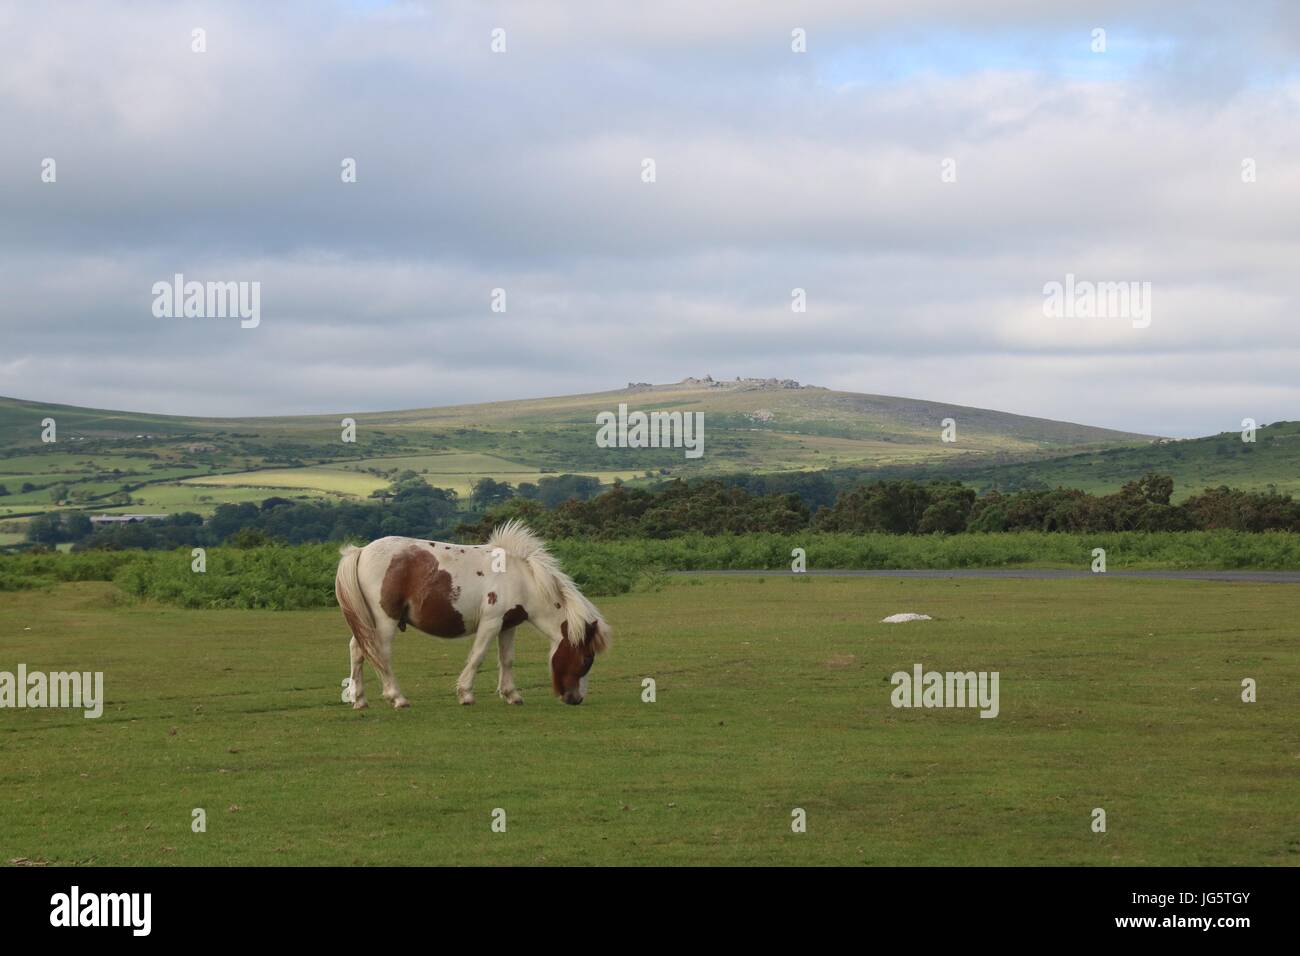 A view of Dartmoor National Park in Devon, England with a wild pony grazing. Stock Photo